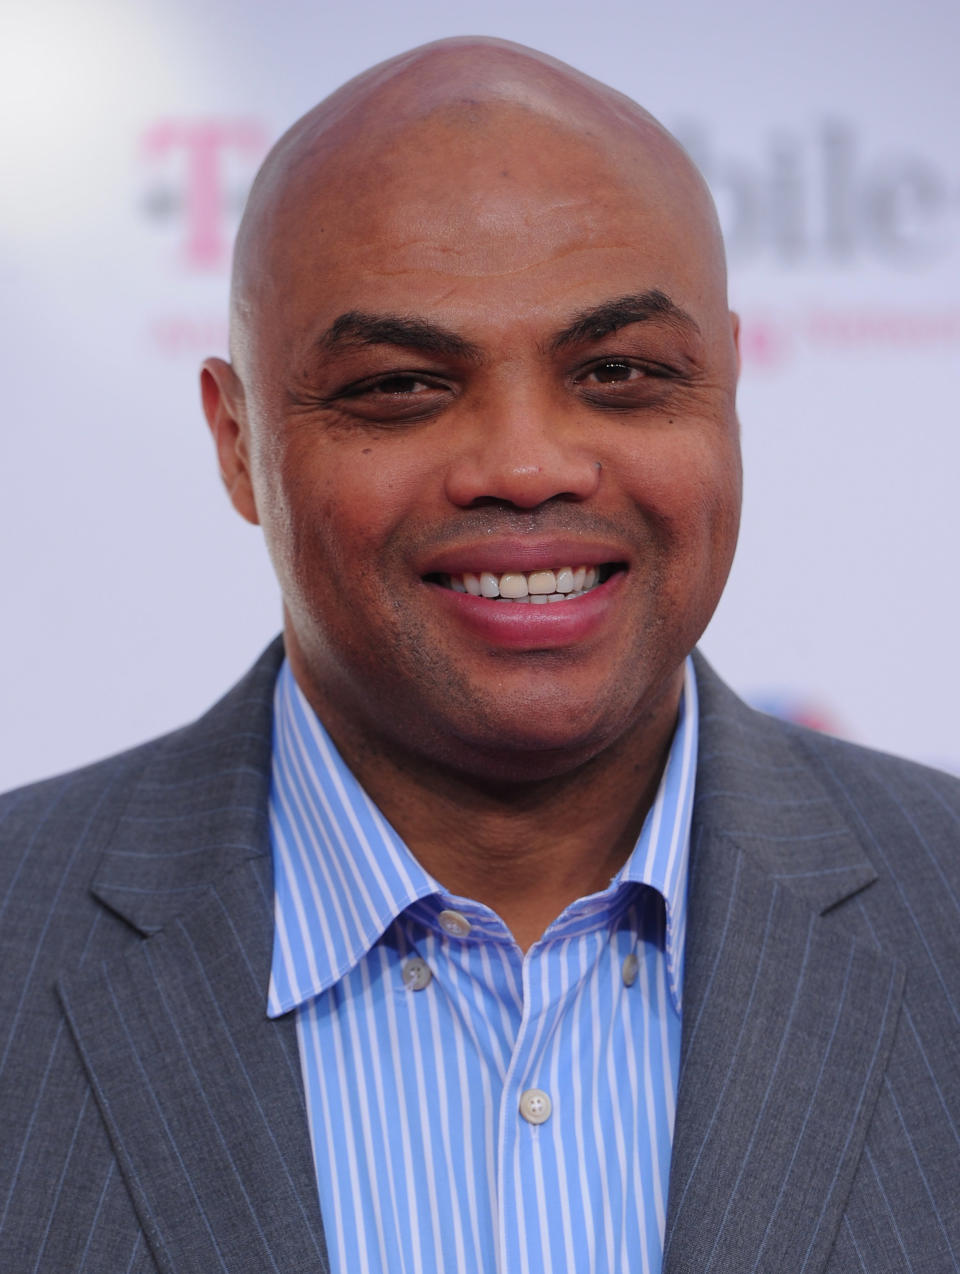 In true Charles Barkley fashion, the NBA Hall of Famer has been a long-time supporter of gay marriage and gay rights, making tongue-in-cheek (yet admirable) comments as <a href="http://sports.espn.go.com/nba/news/story?id=2566899">early as 2006</a>.   Barkley <a href="http://www.advocate.com/news/daily-news/2011/01/18/charles-barkley-loves-gay-people">said on-air last year</a>, “God bless the gay people. They are great people.” And in response to Sean Avery’s advocacy, Barkley added he’d have <a href="http://content.usatoday.com/communities/gameon/post/2011/05/media-watch-charles-barkley-on-gay-athletes----we-dont-care/1#.UFCet0JAsu9">no problem playing with an openly gay teammate</a>. 